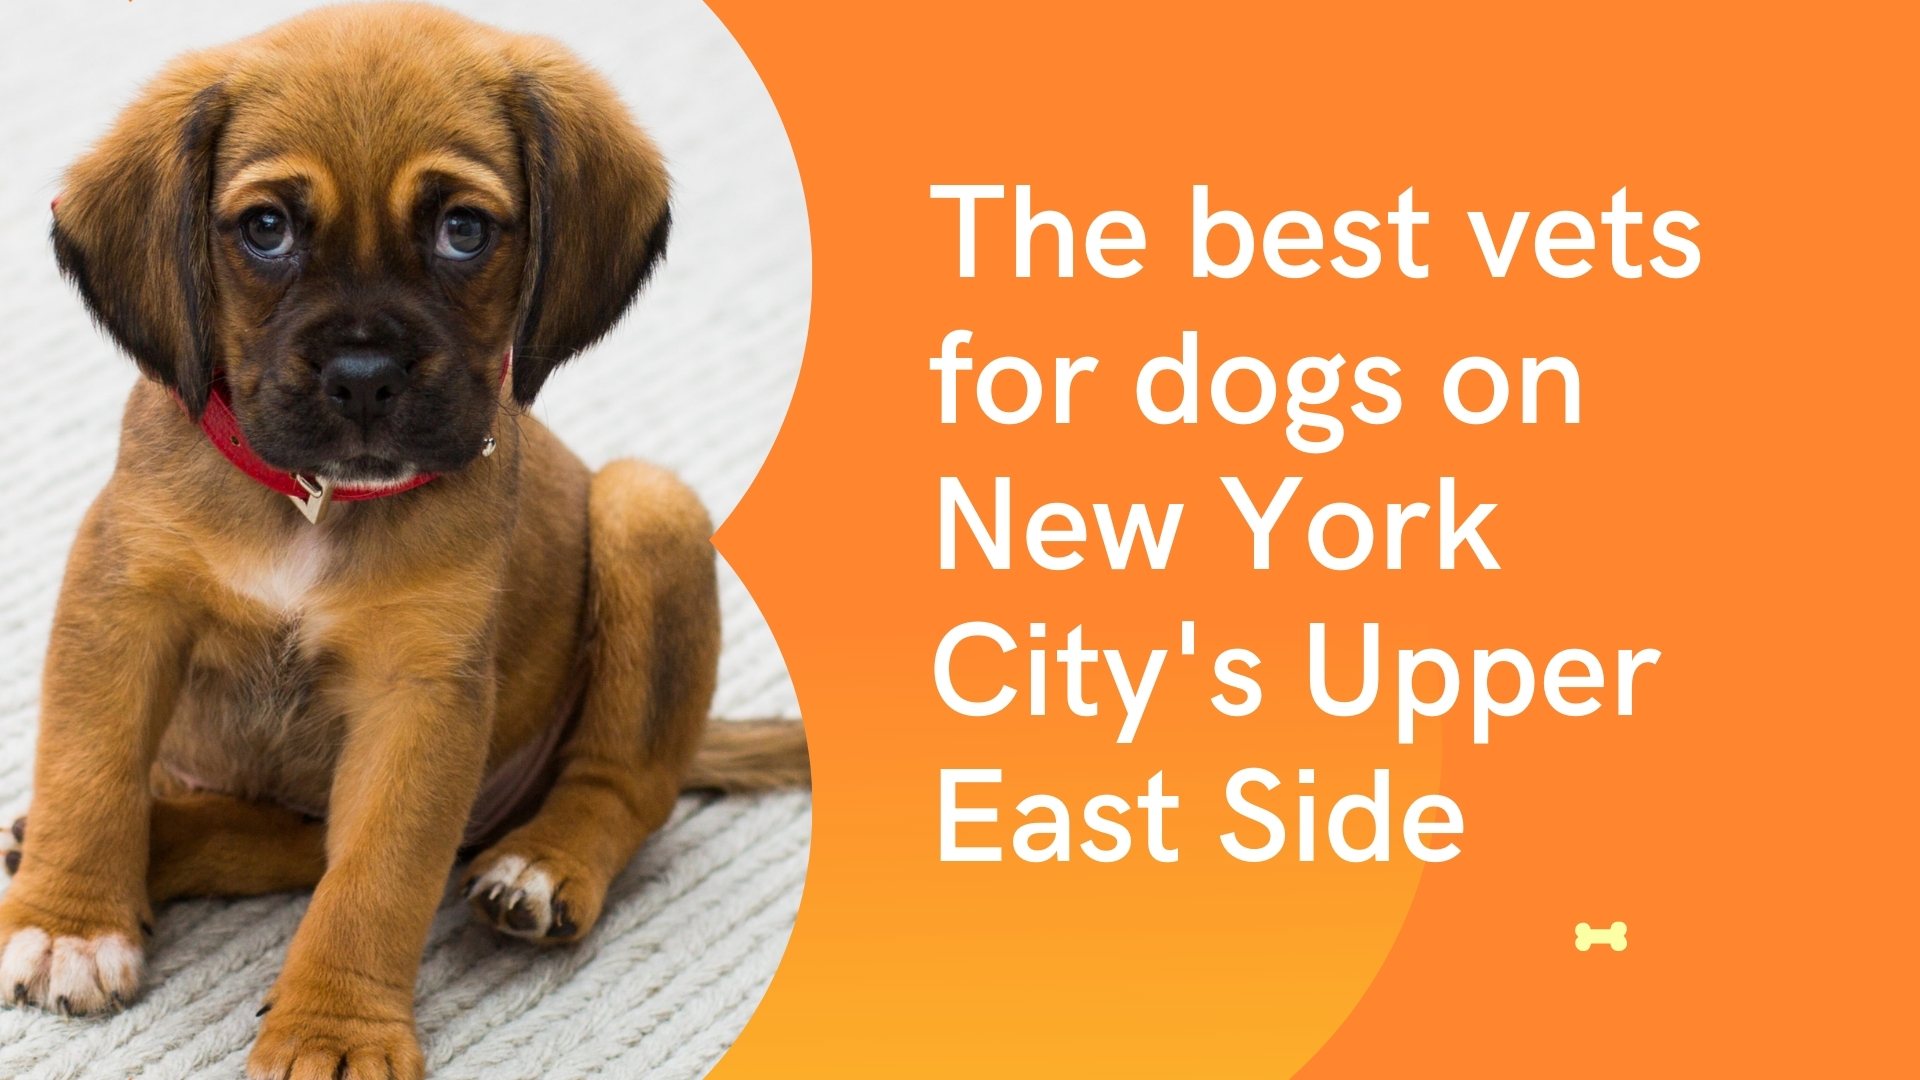 The best vets for dogs on New York City's Upper East Side